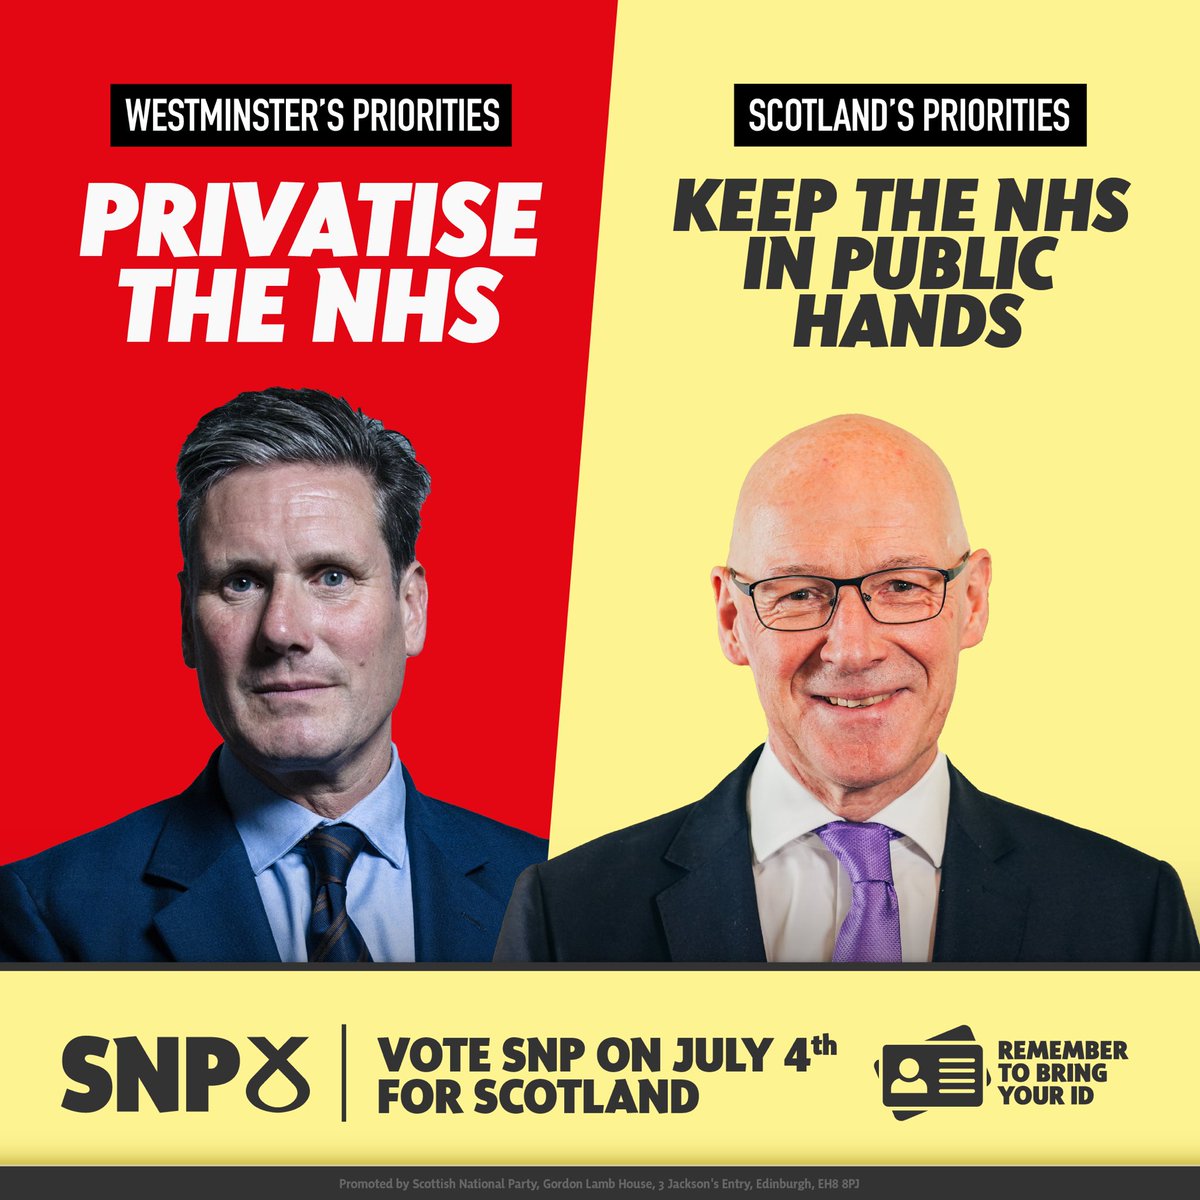 📢 The SNP will always prioritise the NHS and defend its founding values. 🥀 Labour want to privatise the NHS. 🗳️ On July 4th, vote SNP to protect our NHS.